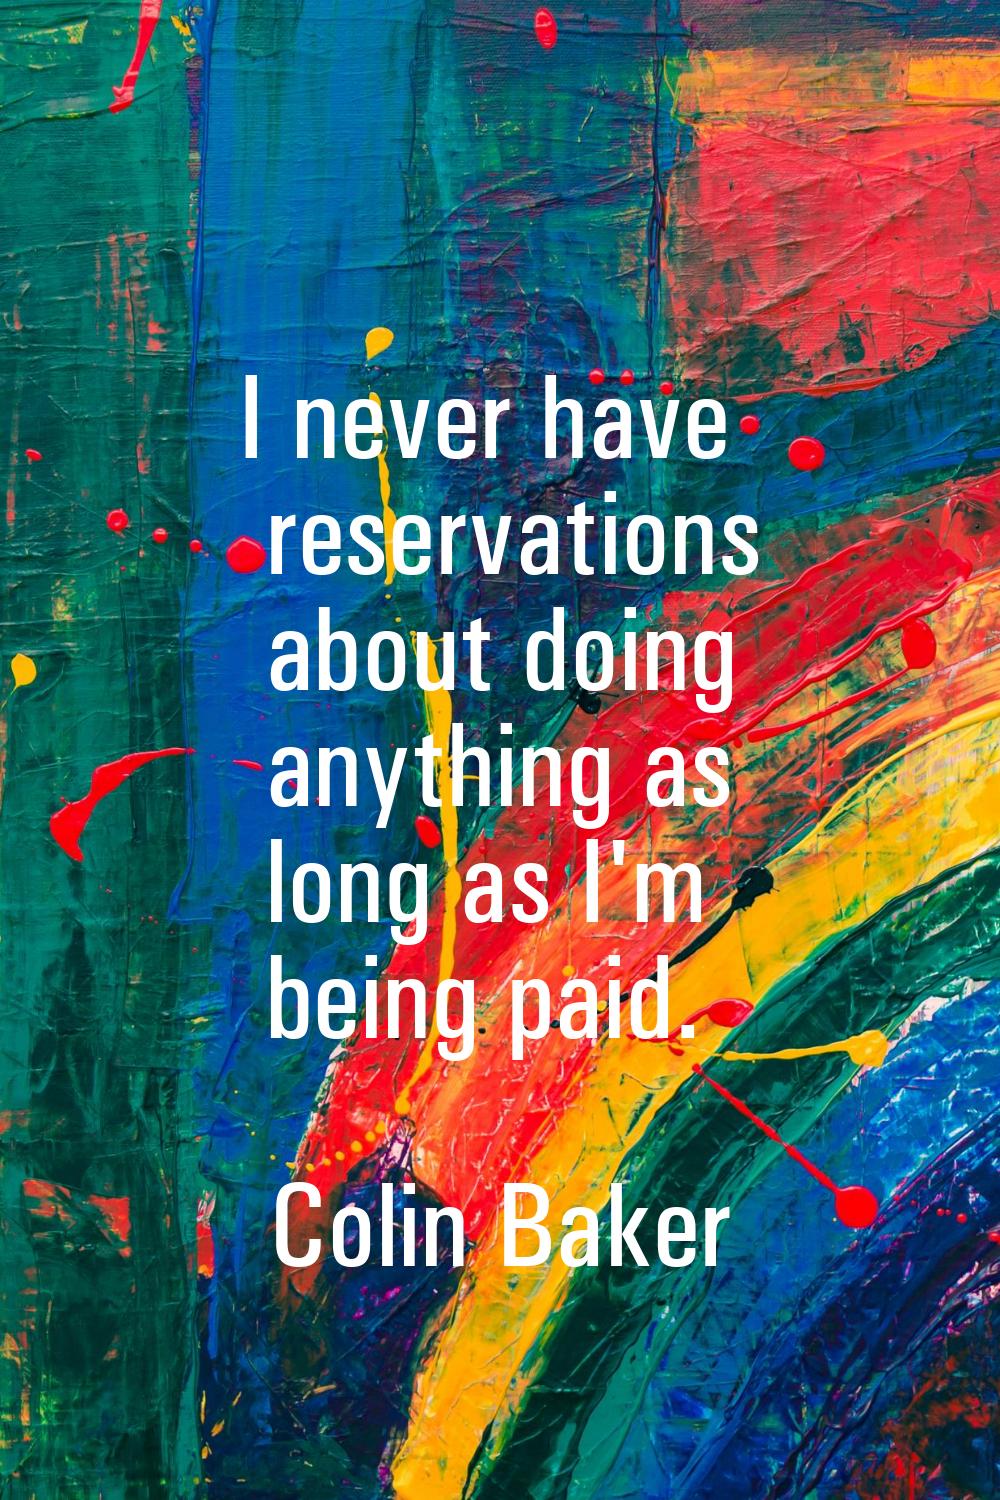 I never have reservations about doing anything as long as I'm being paid.